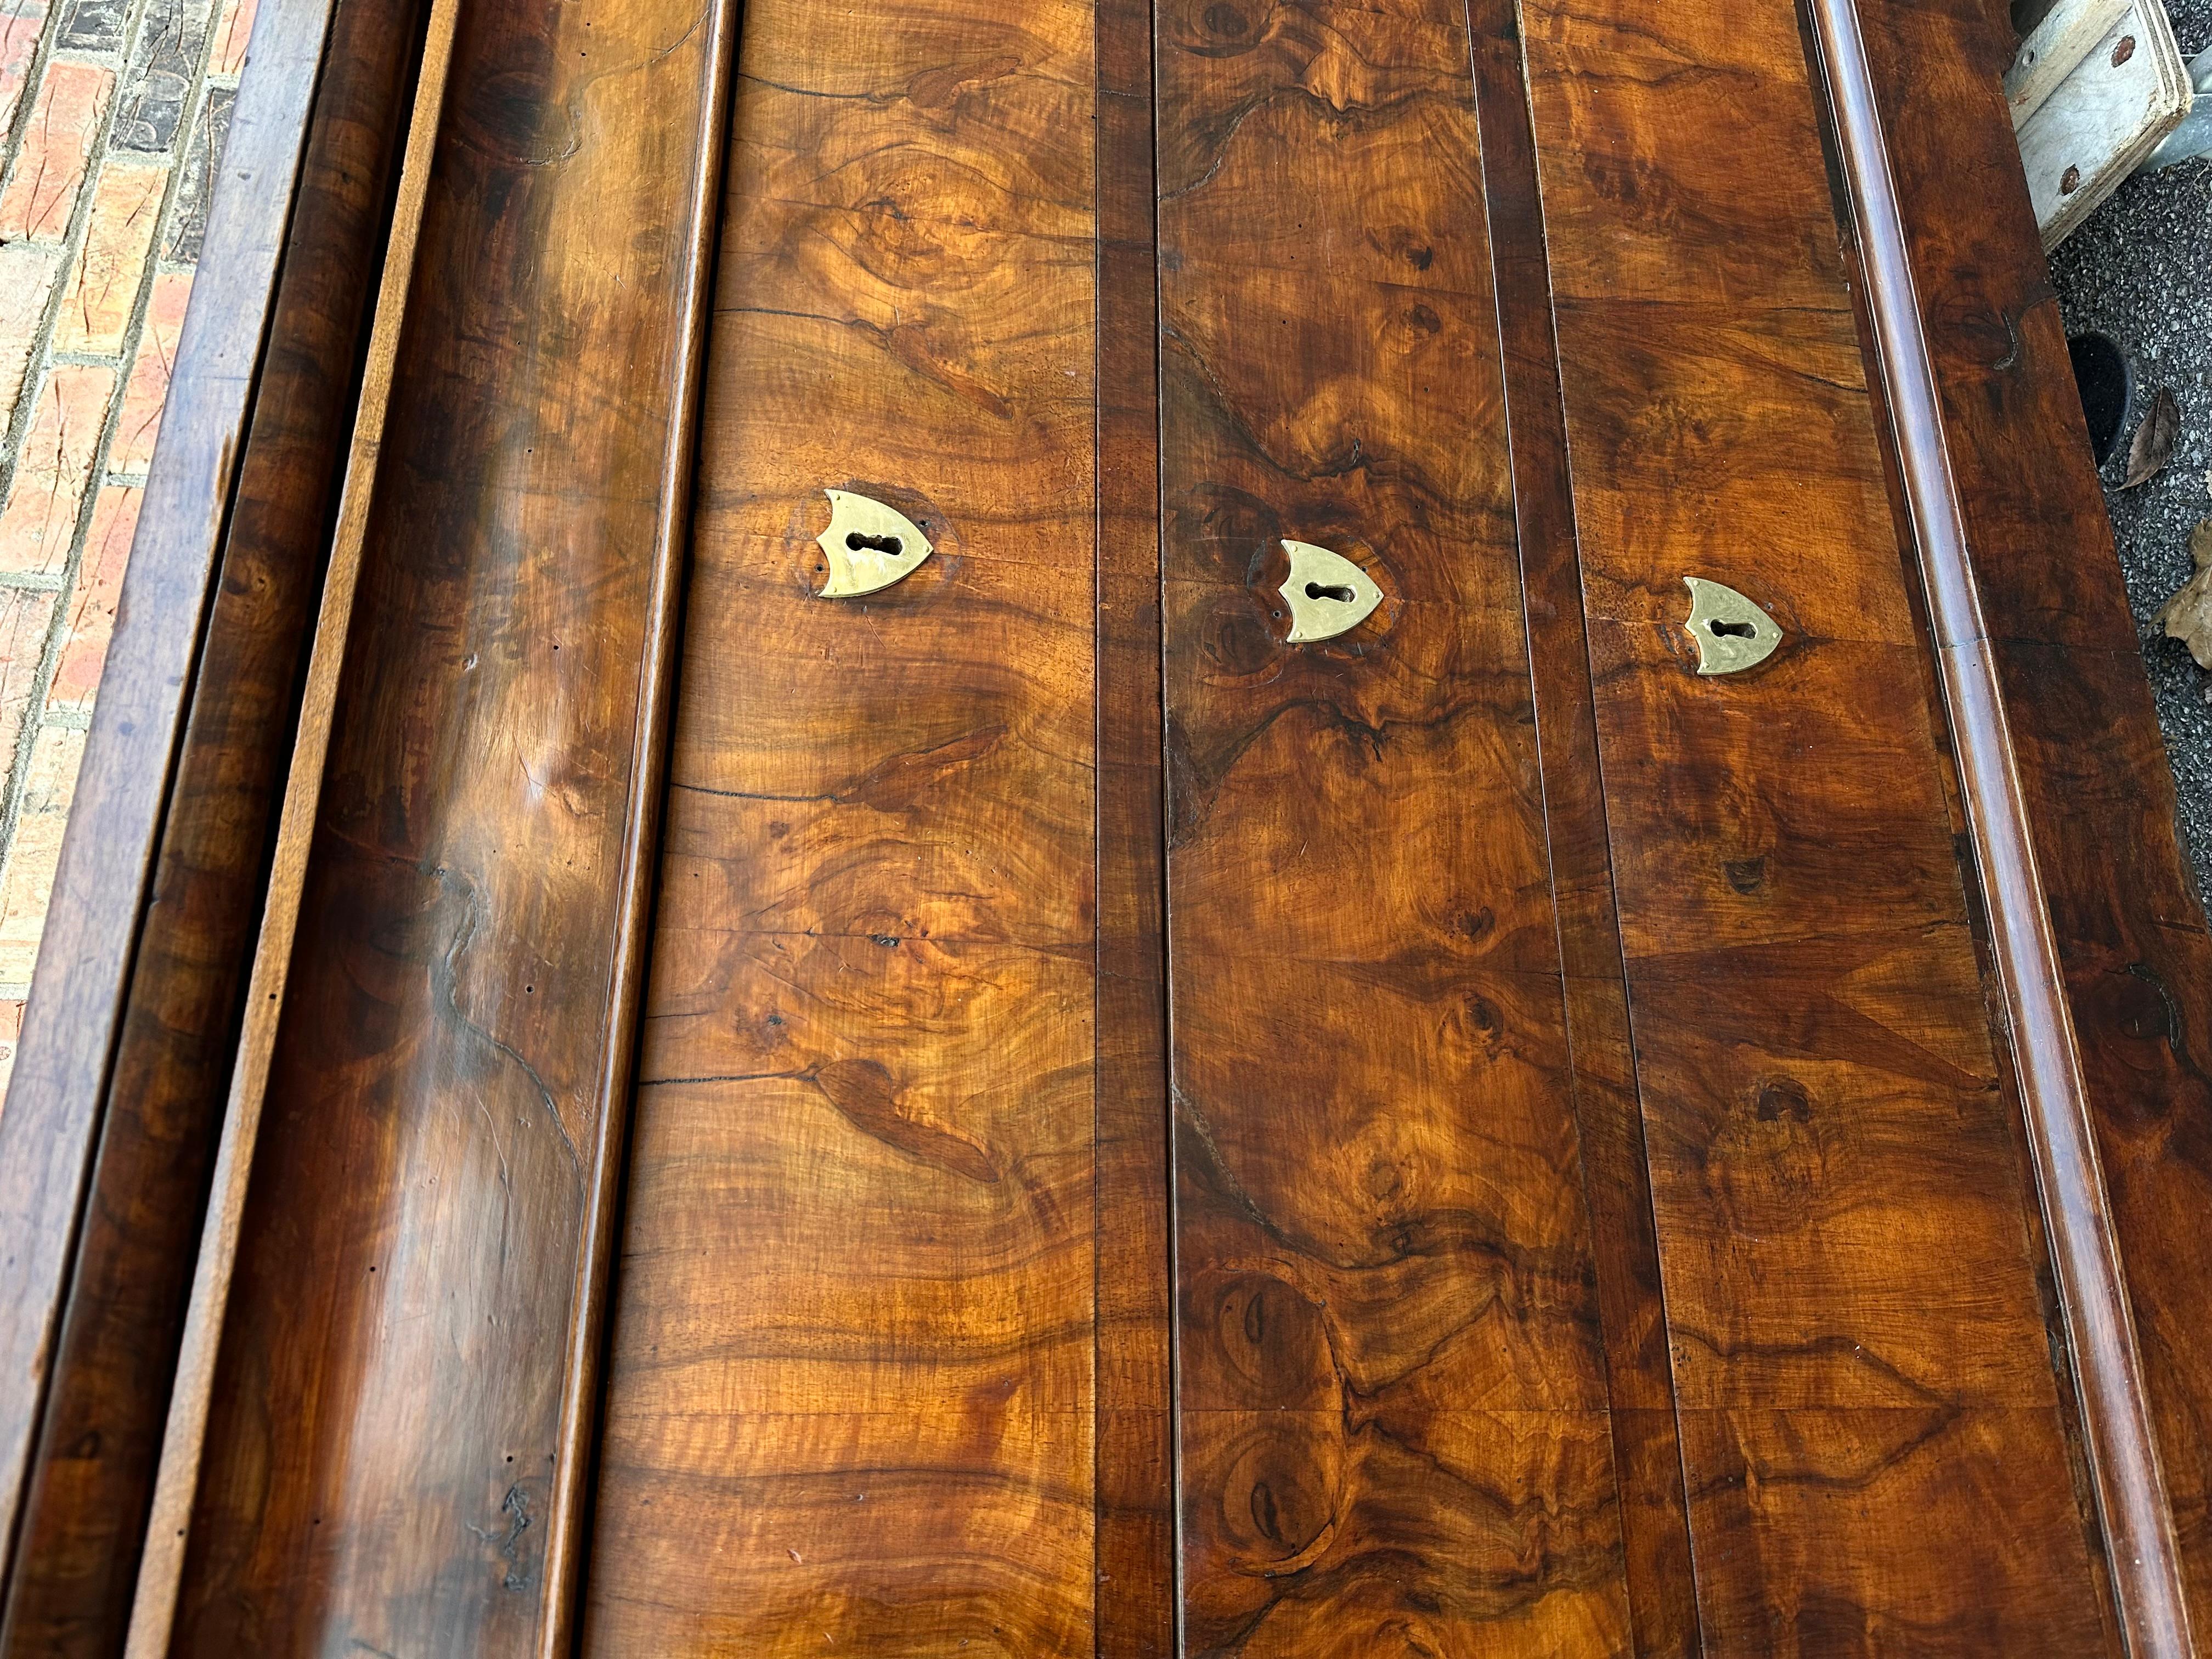 This is a beautiful 19th century French piece! The burled walnut has gorgeous natural design that is excellently showcased by the chest of drawer's boldly simple front. The wood has such a splendid character and patina of its own, little